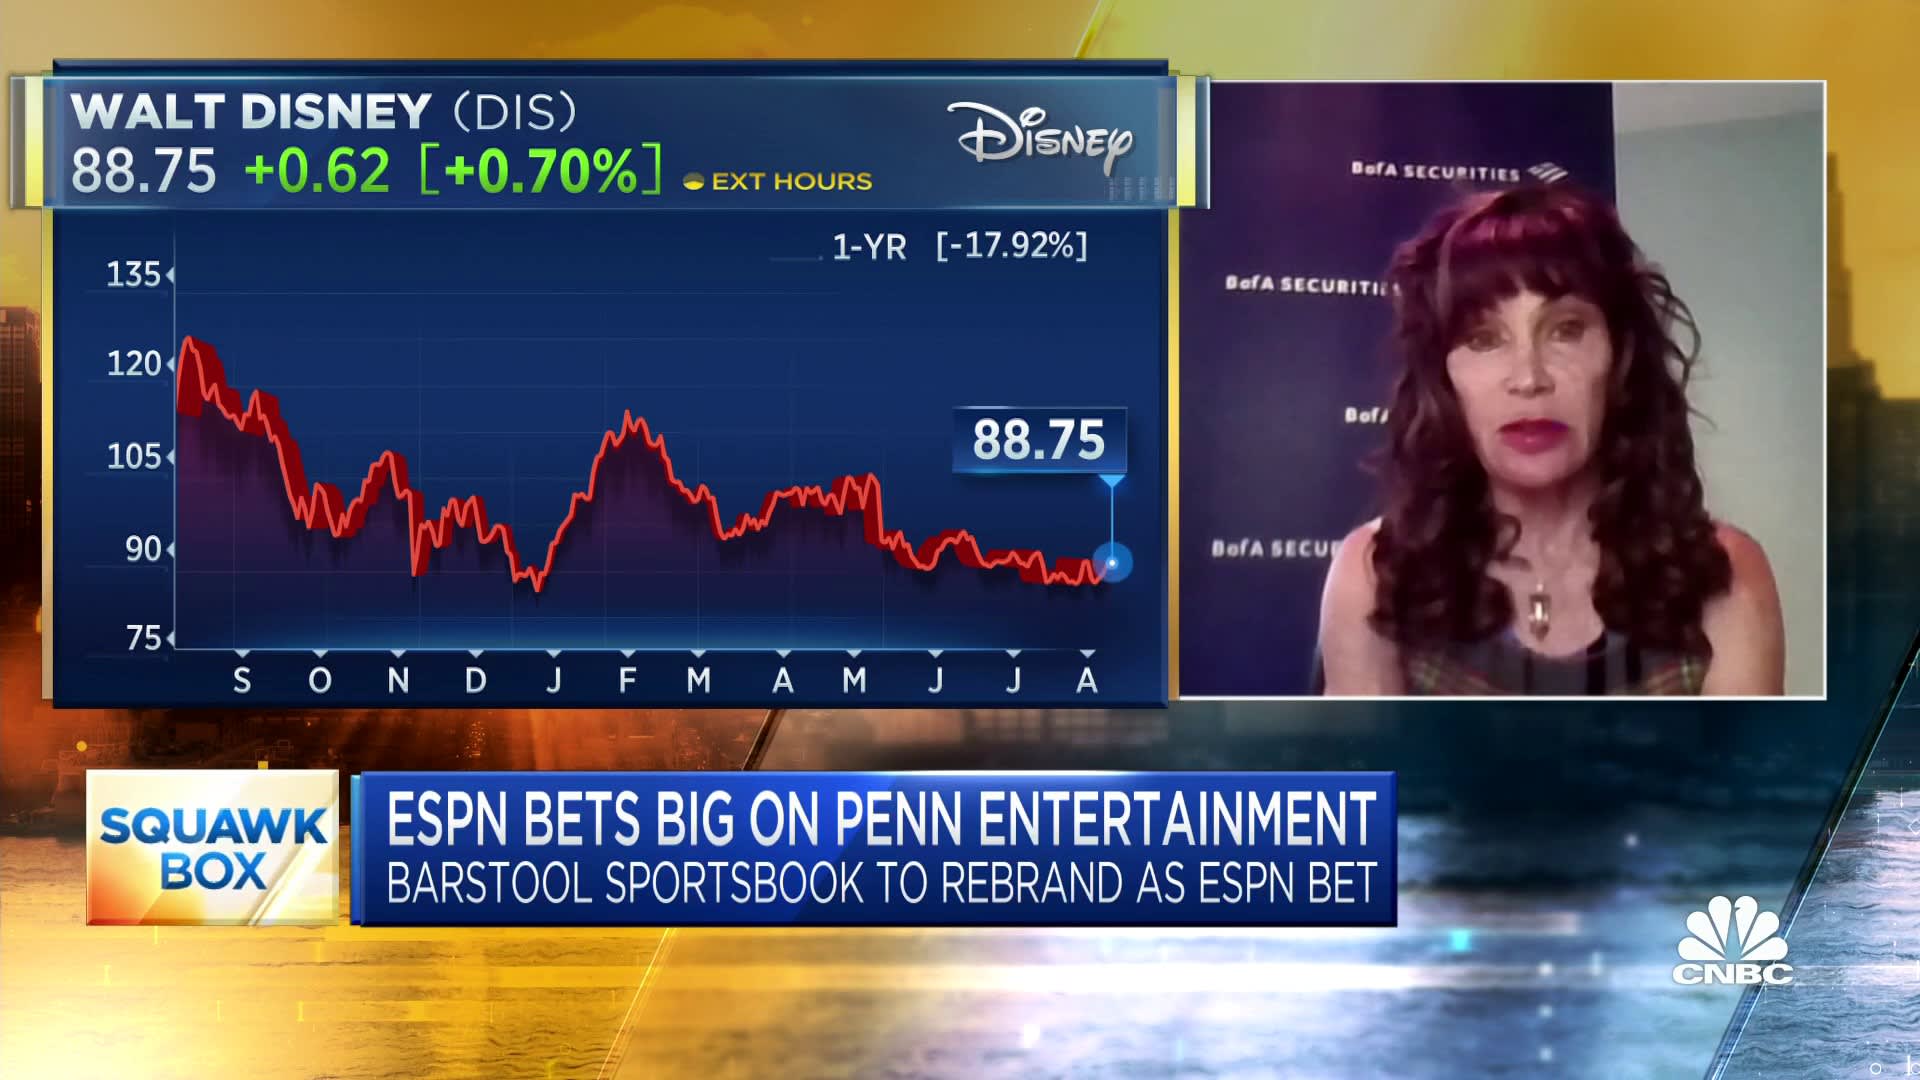 Bob Iger will lead Disney through this difficult time, says BofA Securities&#x2019; Jessica Reif Ehrlich